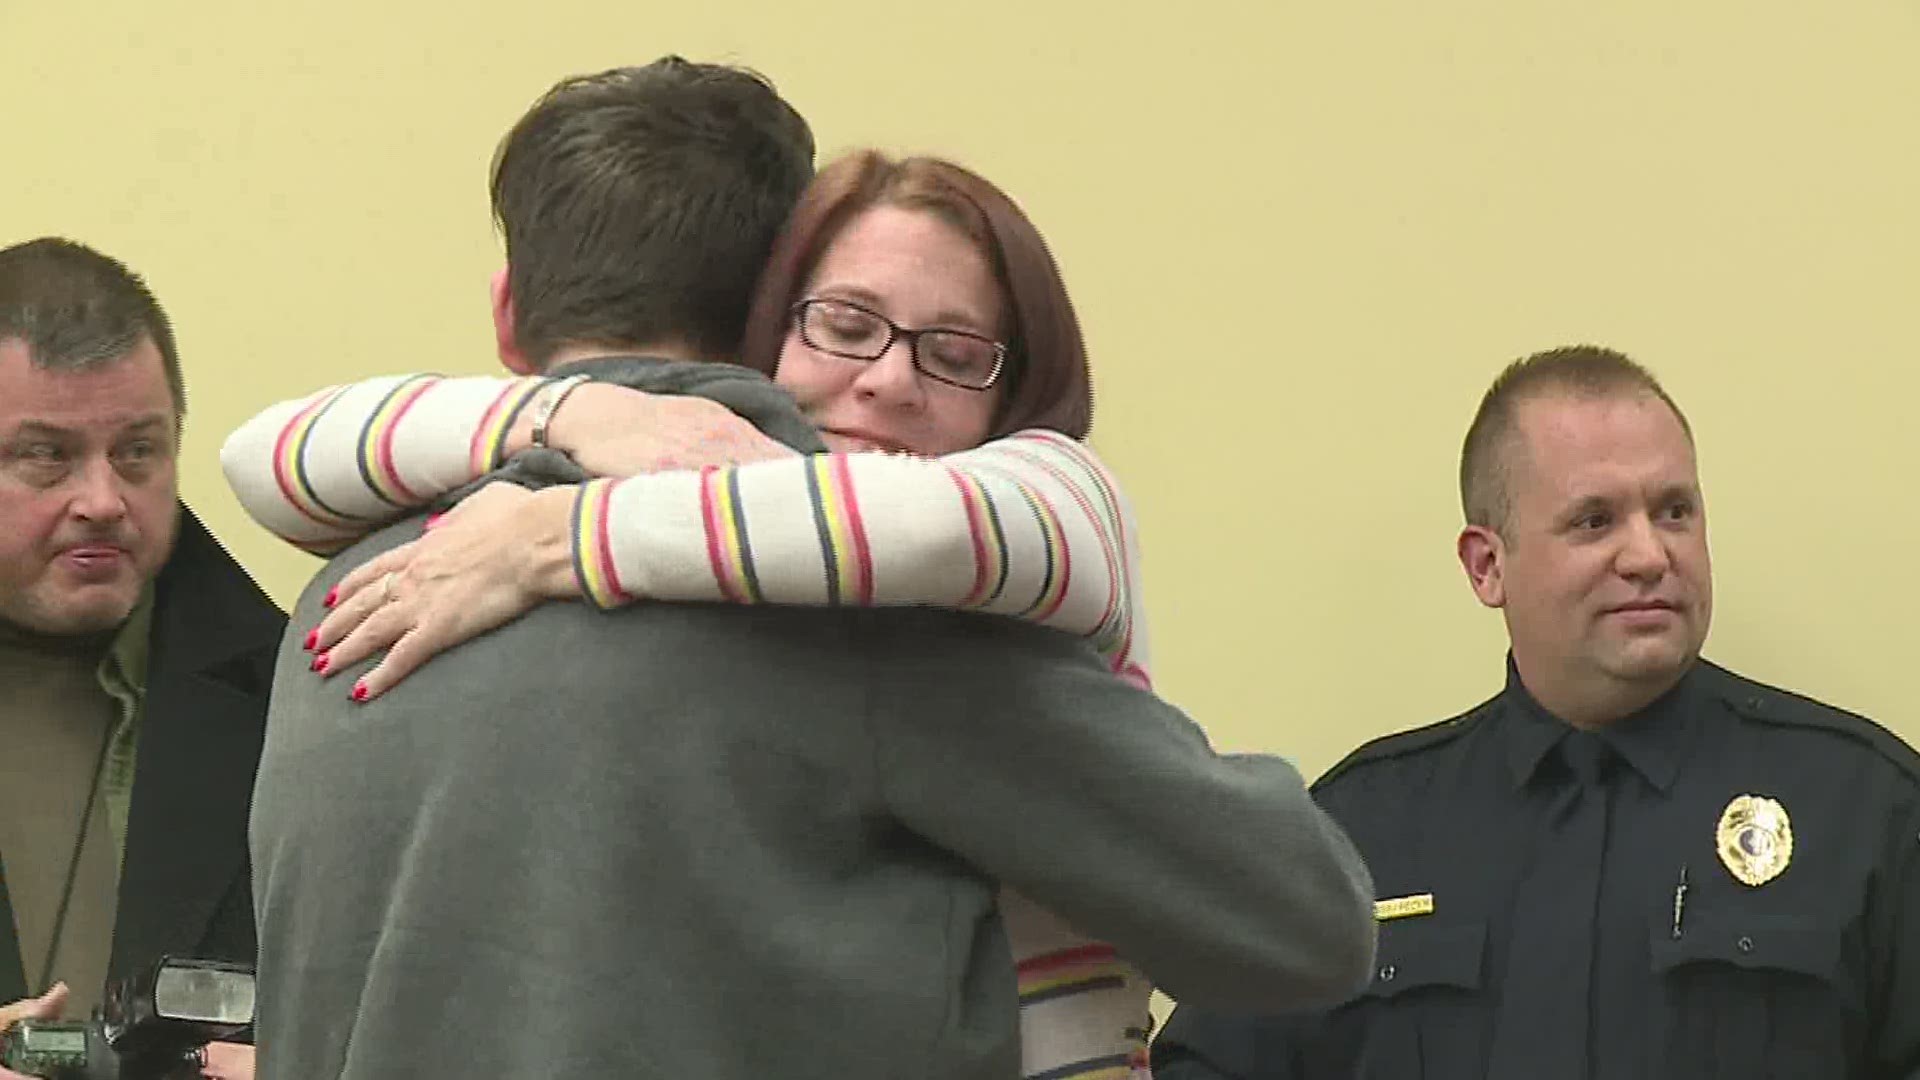 The teens were given the Heroic Bravery Award at a meeting in Lehman Township.